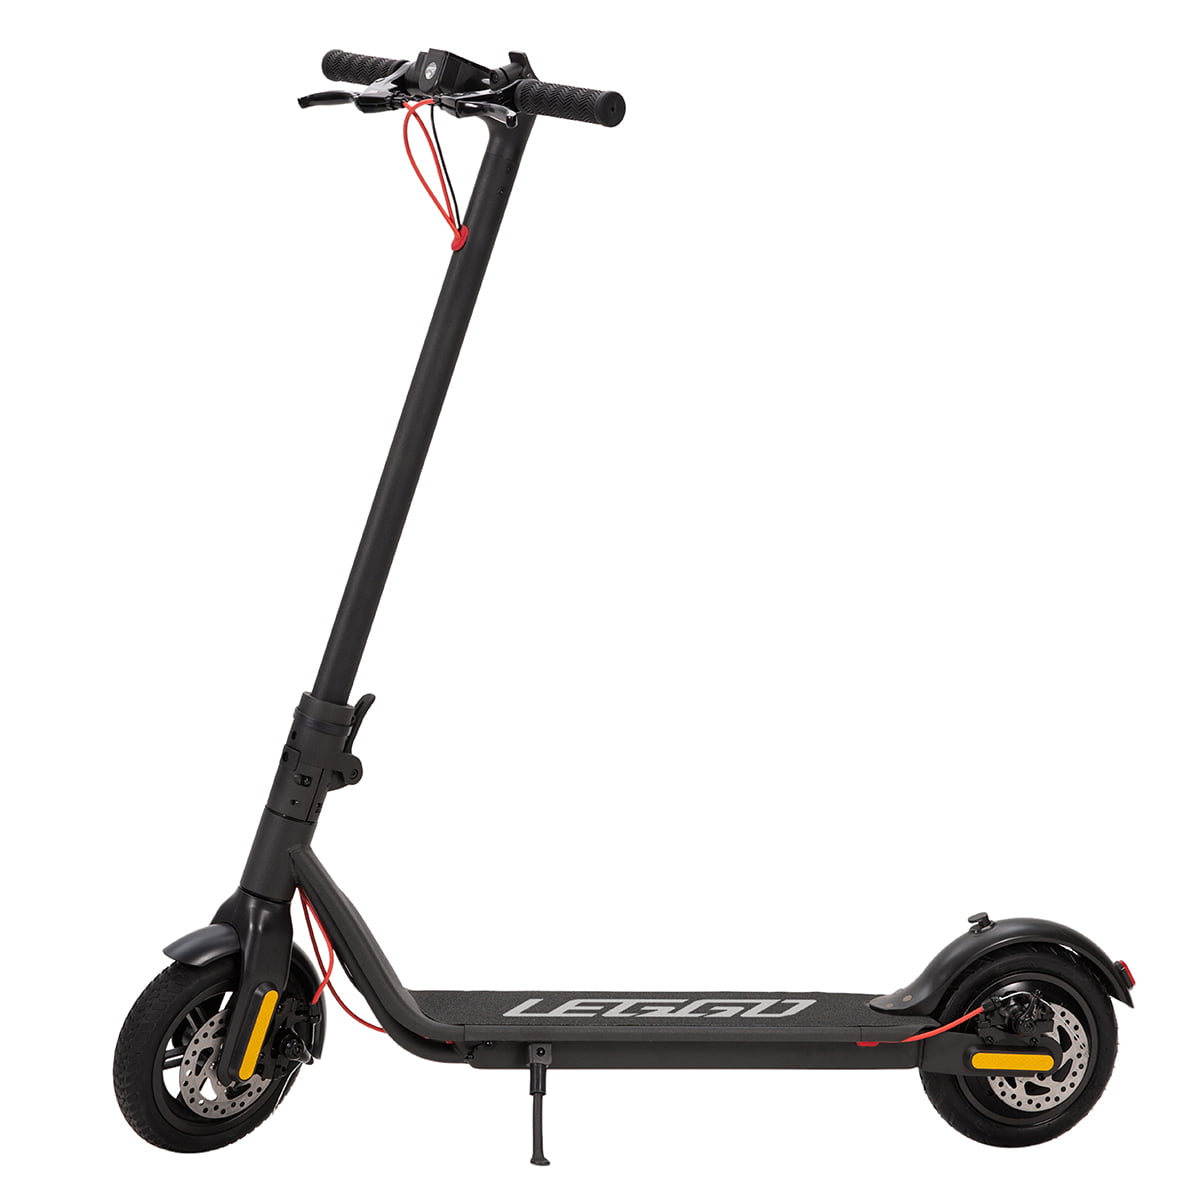 LEGGO Scooter for Adult Foldable Portable Lightweight Premium Li Ion Battery Electric Scooters